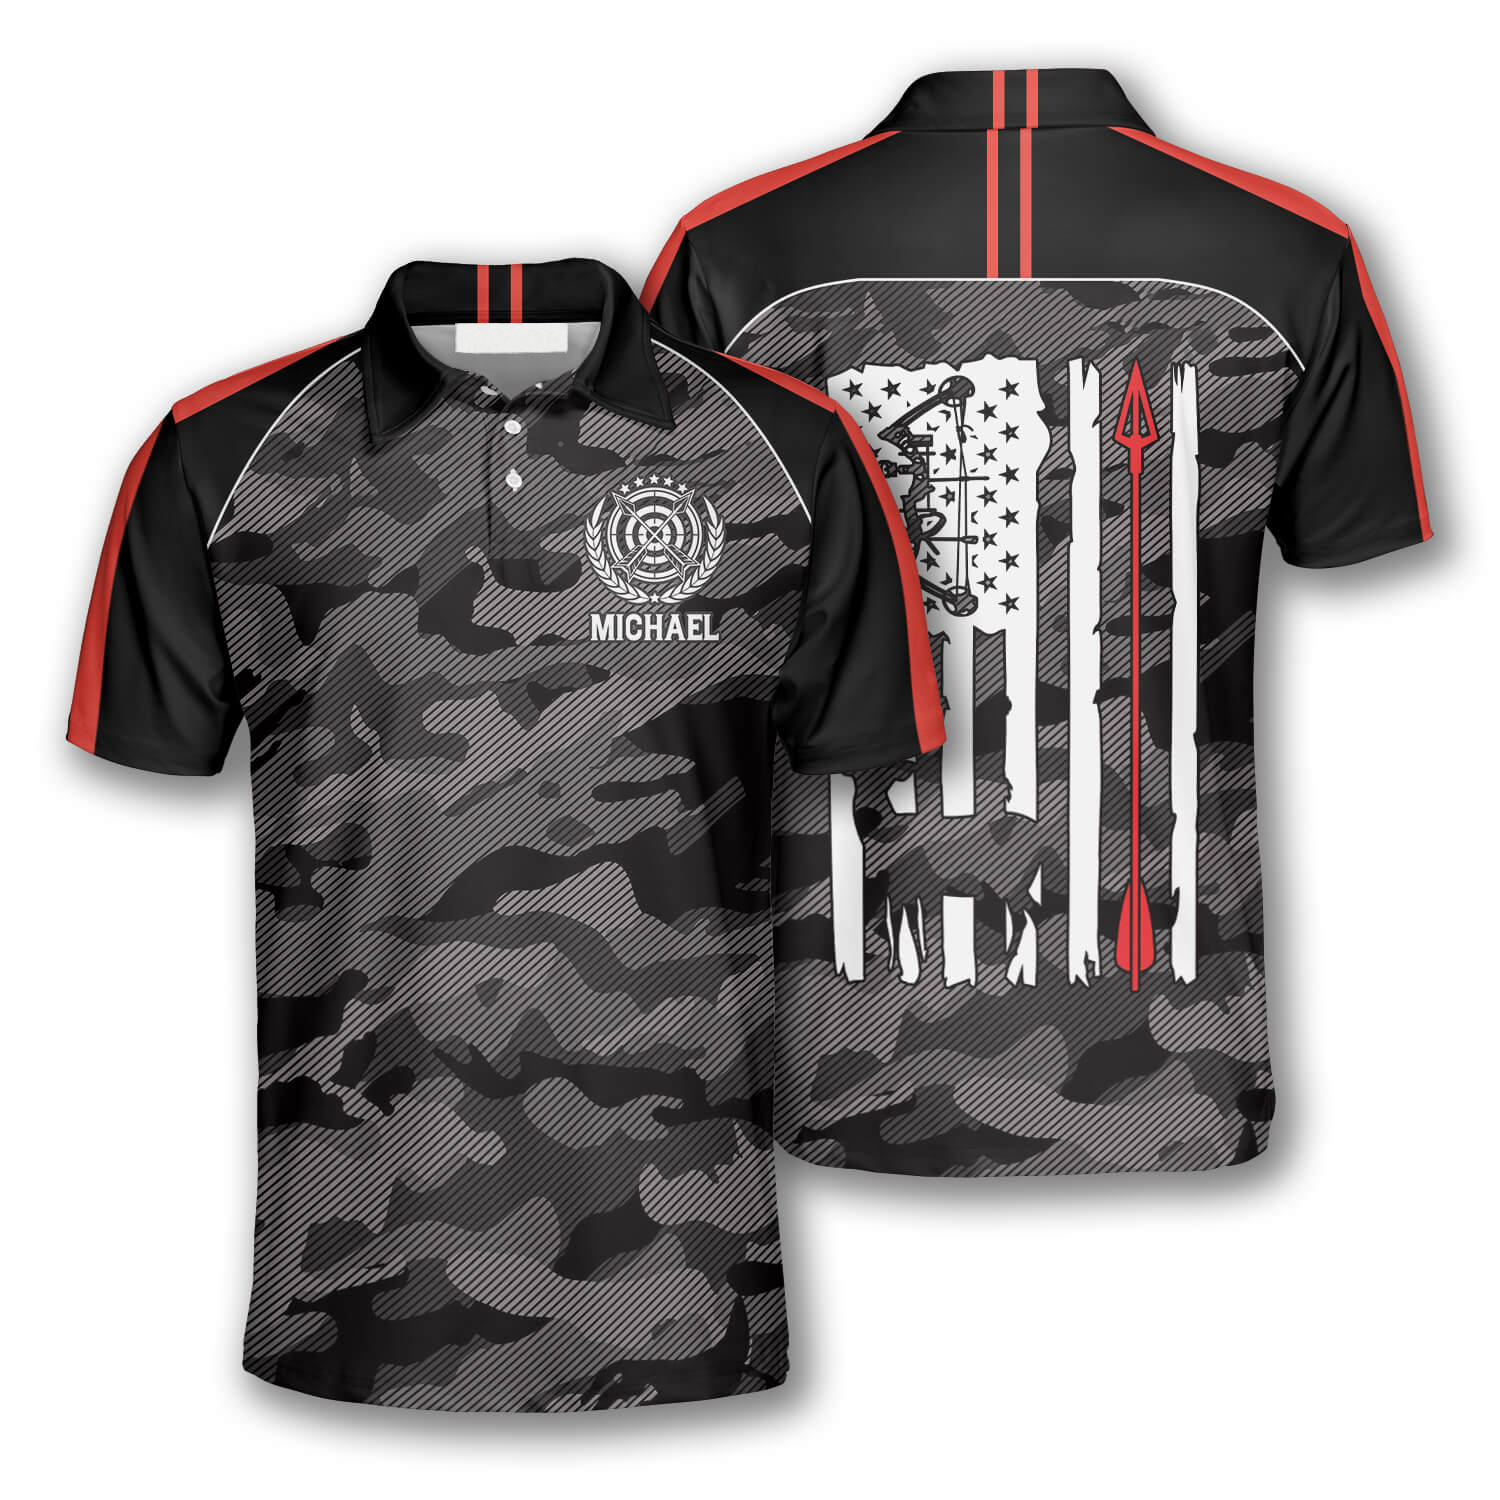 Archery Camouflage American Flag Custom Archery Shirts for Men/ Idea Gift for Archery Lover